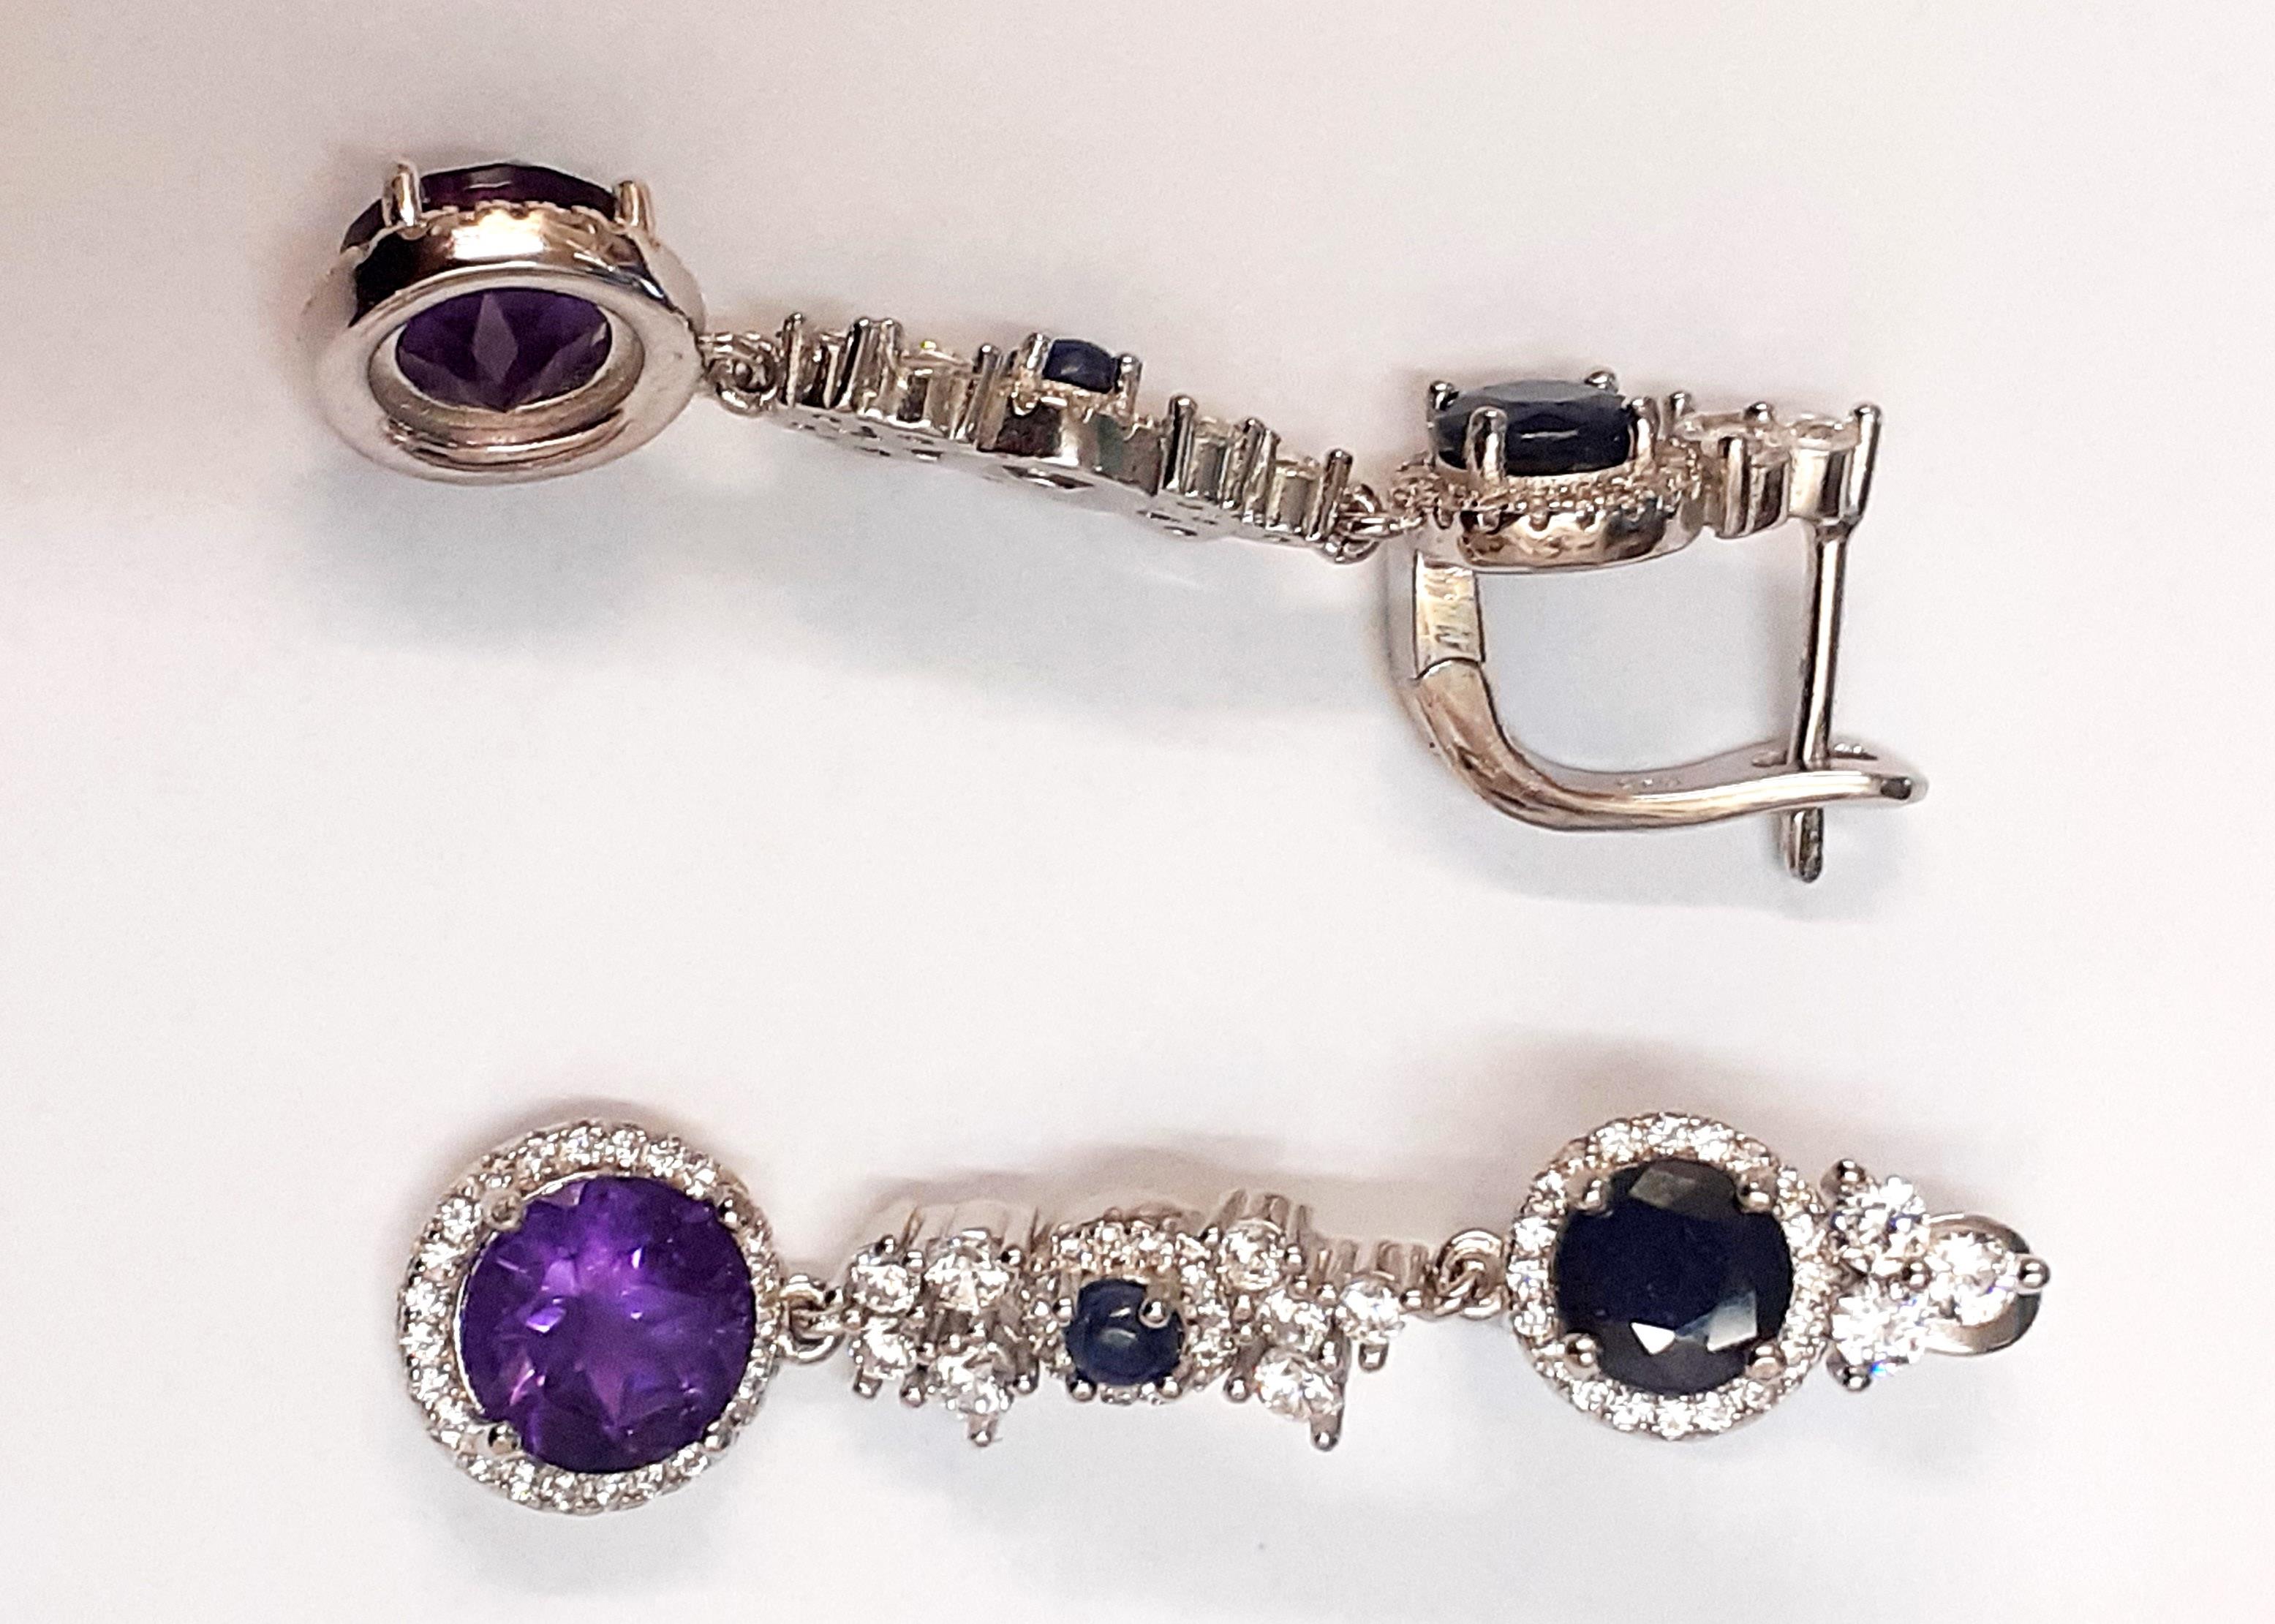 A pair of 925 silver drop earrings set with amethyst, sapphires and white stones, L. 4.8cm. - Image 2 of 2